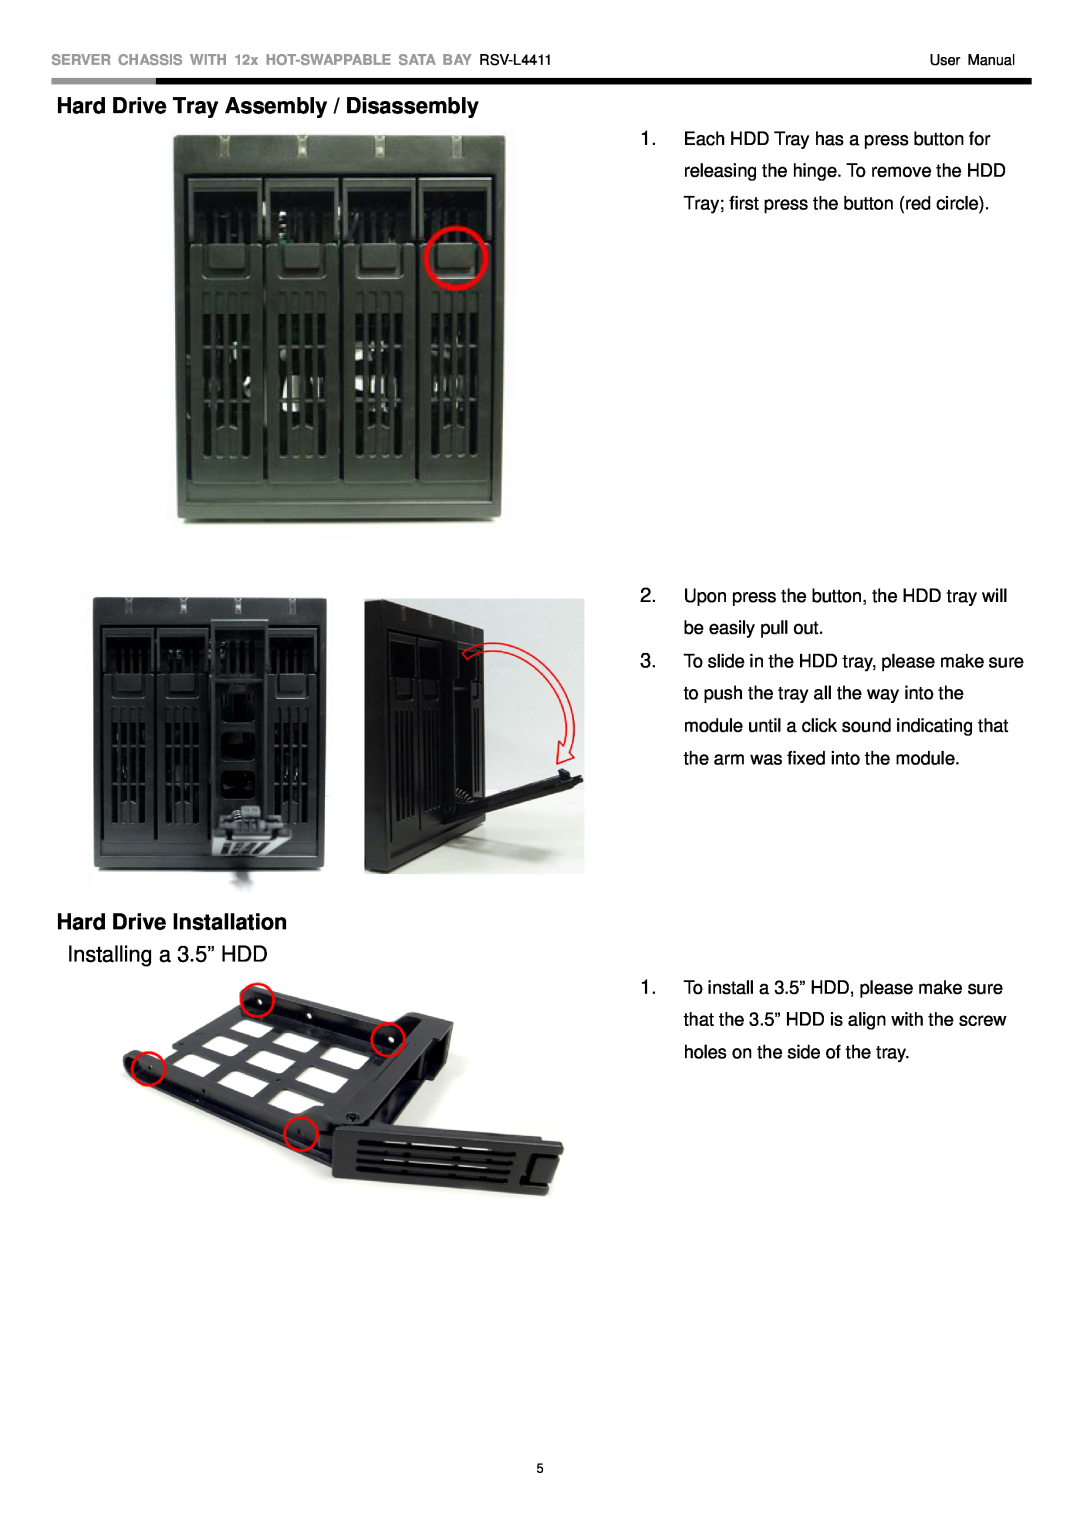 Rosewill RSV-L4411 user manual Hard Drive Tray Assembly / Disassembly, Hard Drive Installation 